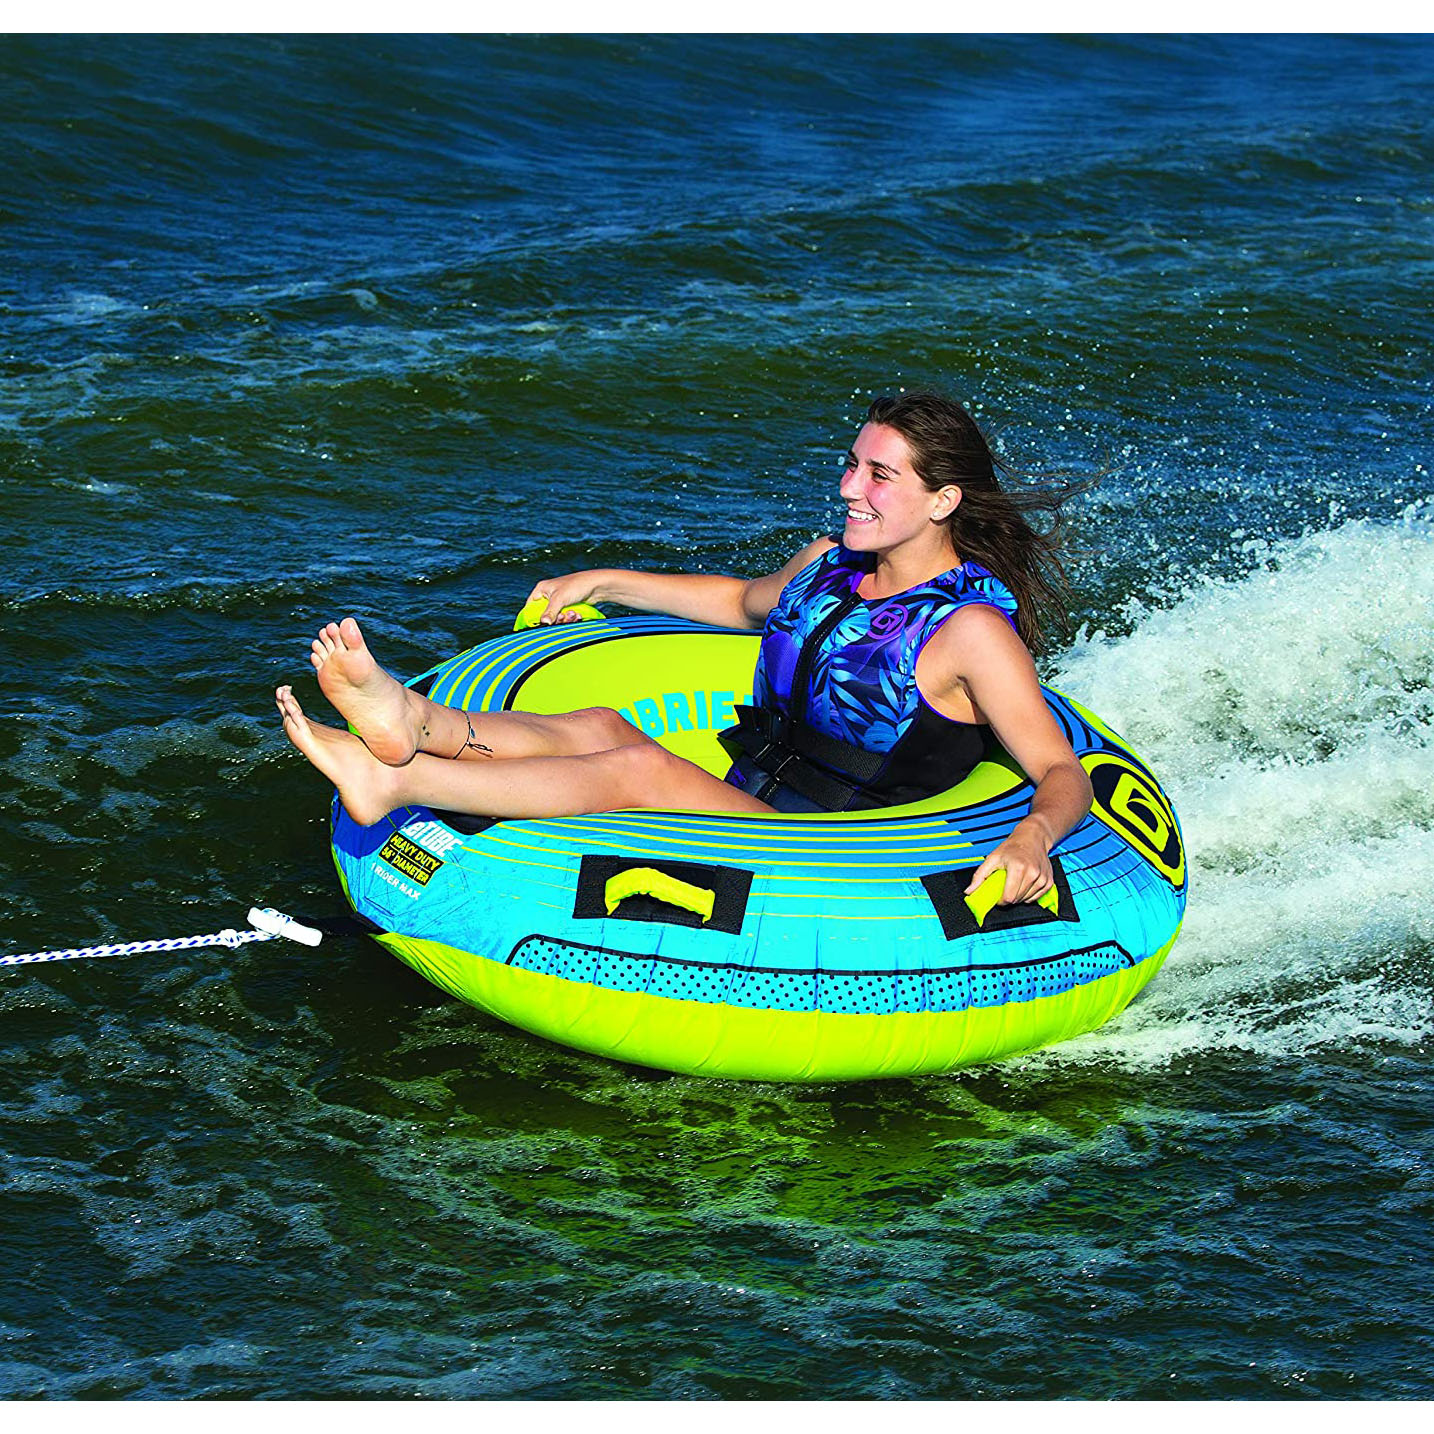 3 Persons towable tube | Towable tubes, Water skiing, Person